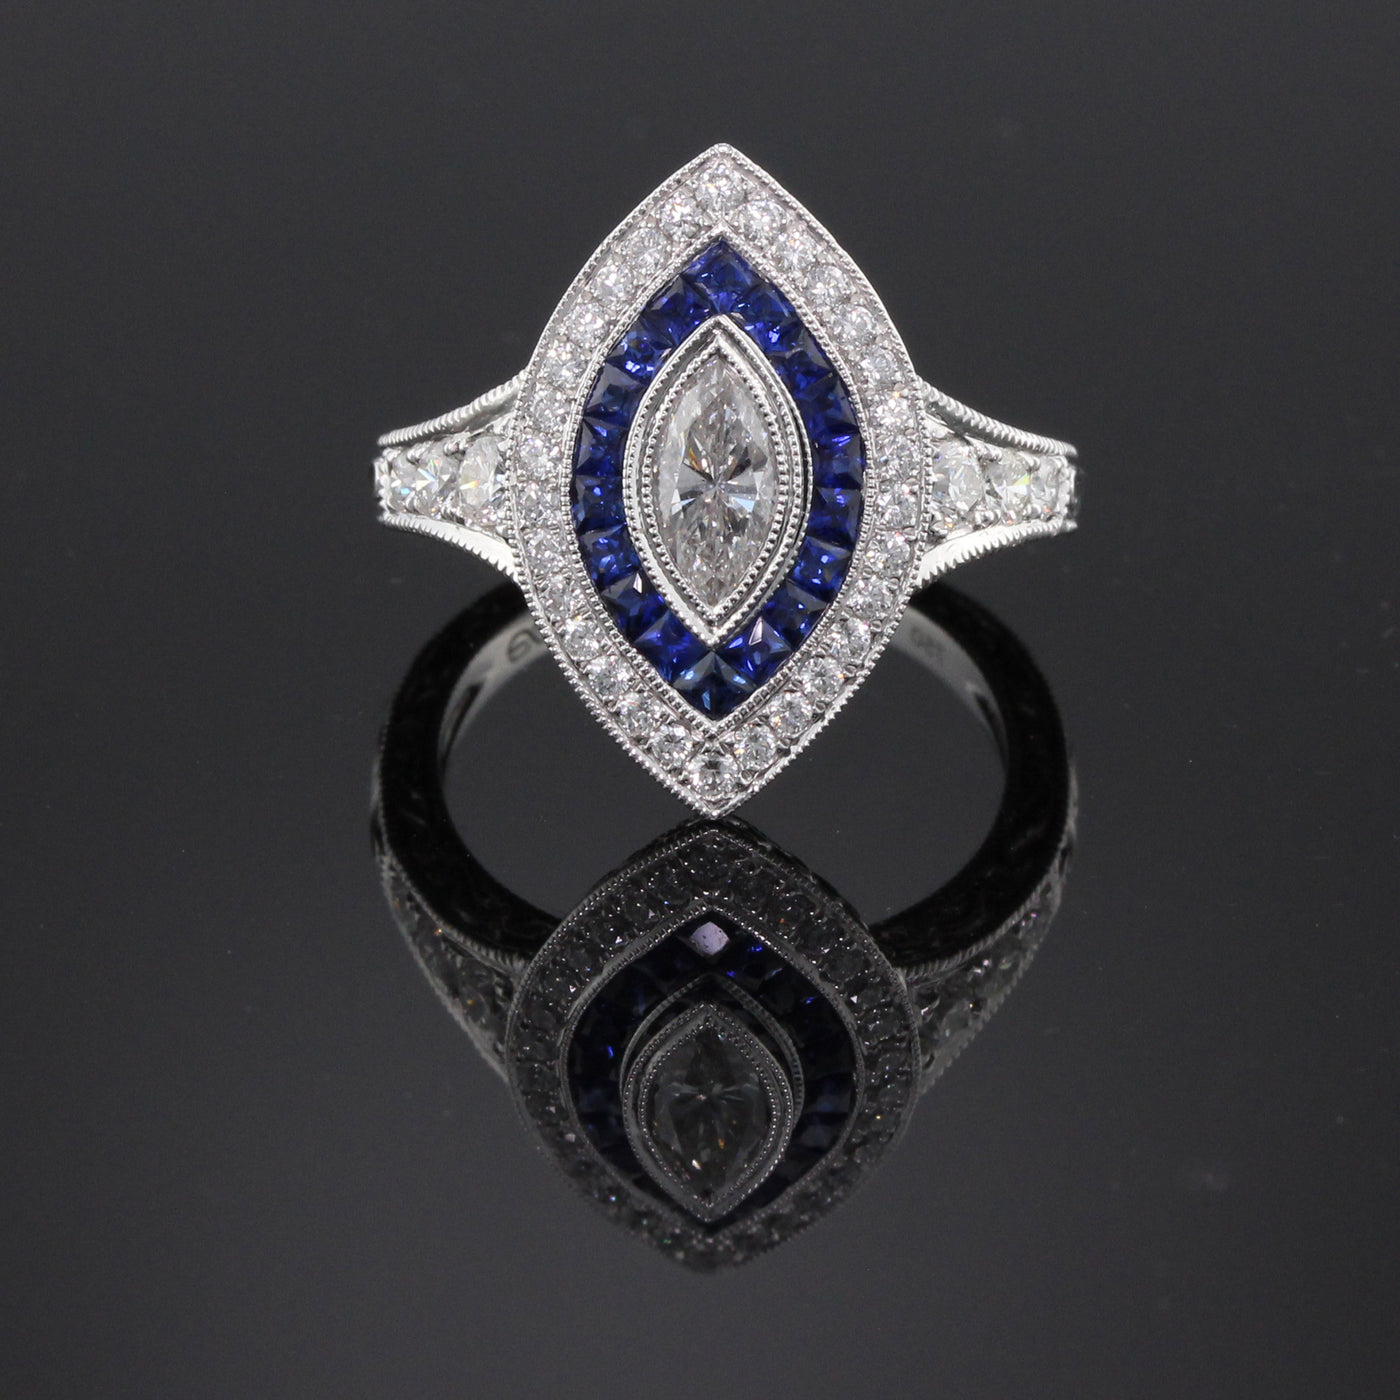 Art Deco Inspired 18K White Gold GIA Marquise Diamond & Sapphire Ring - The Antique Parlour